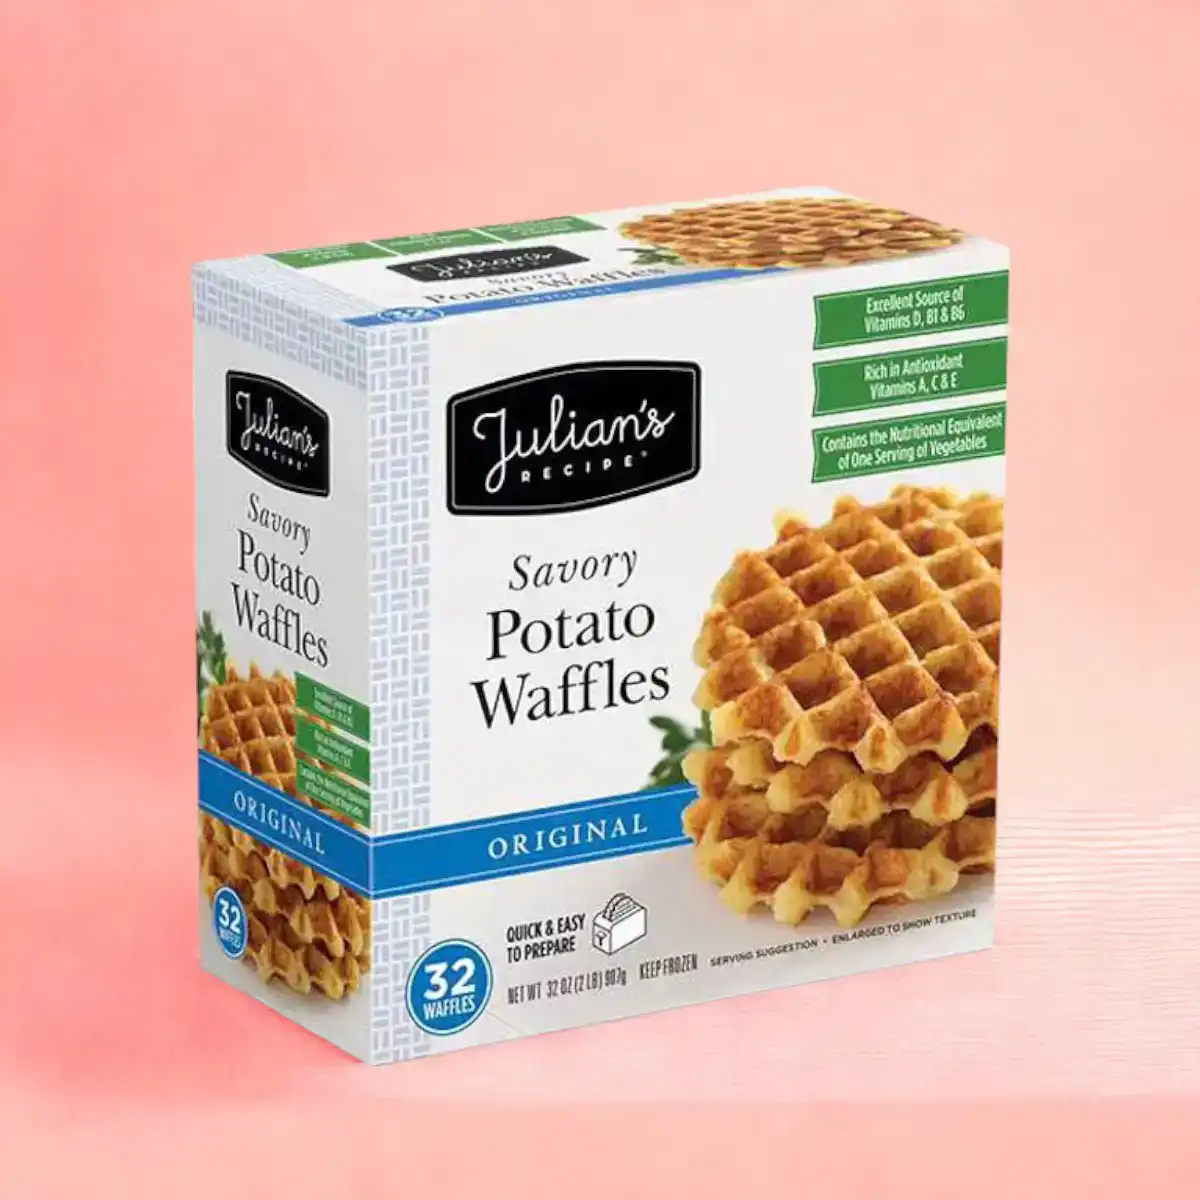 waffle-boxes-with discounted prices